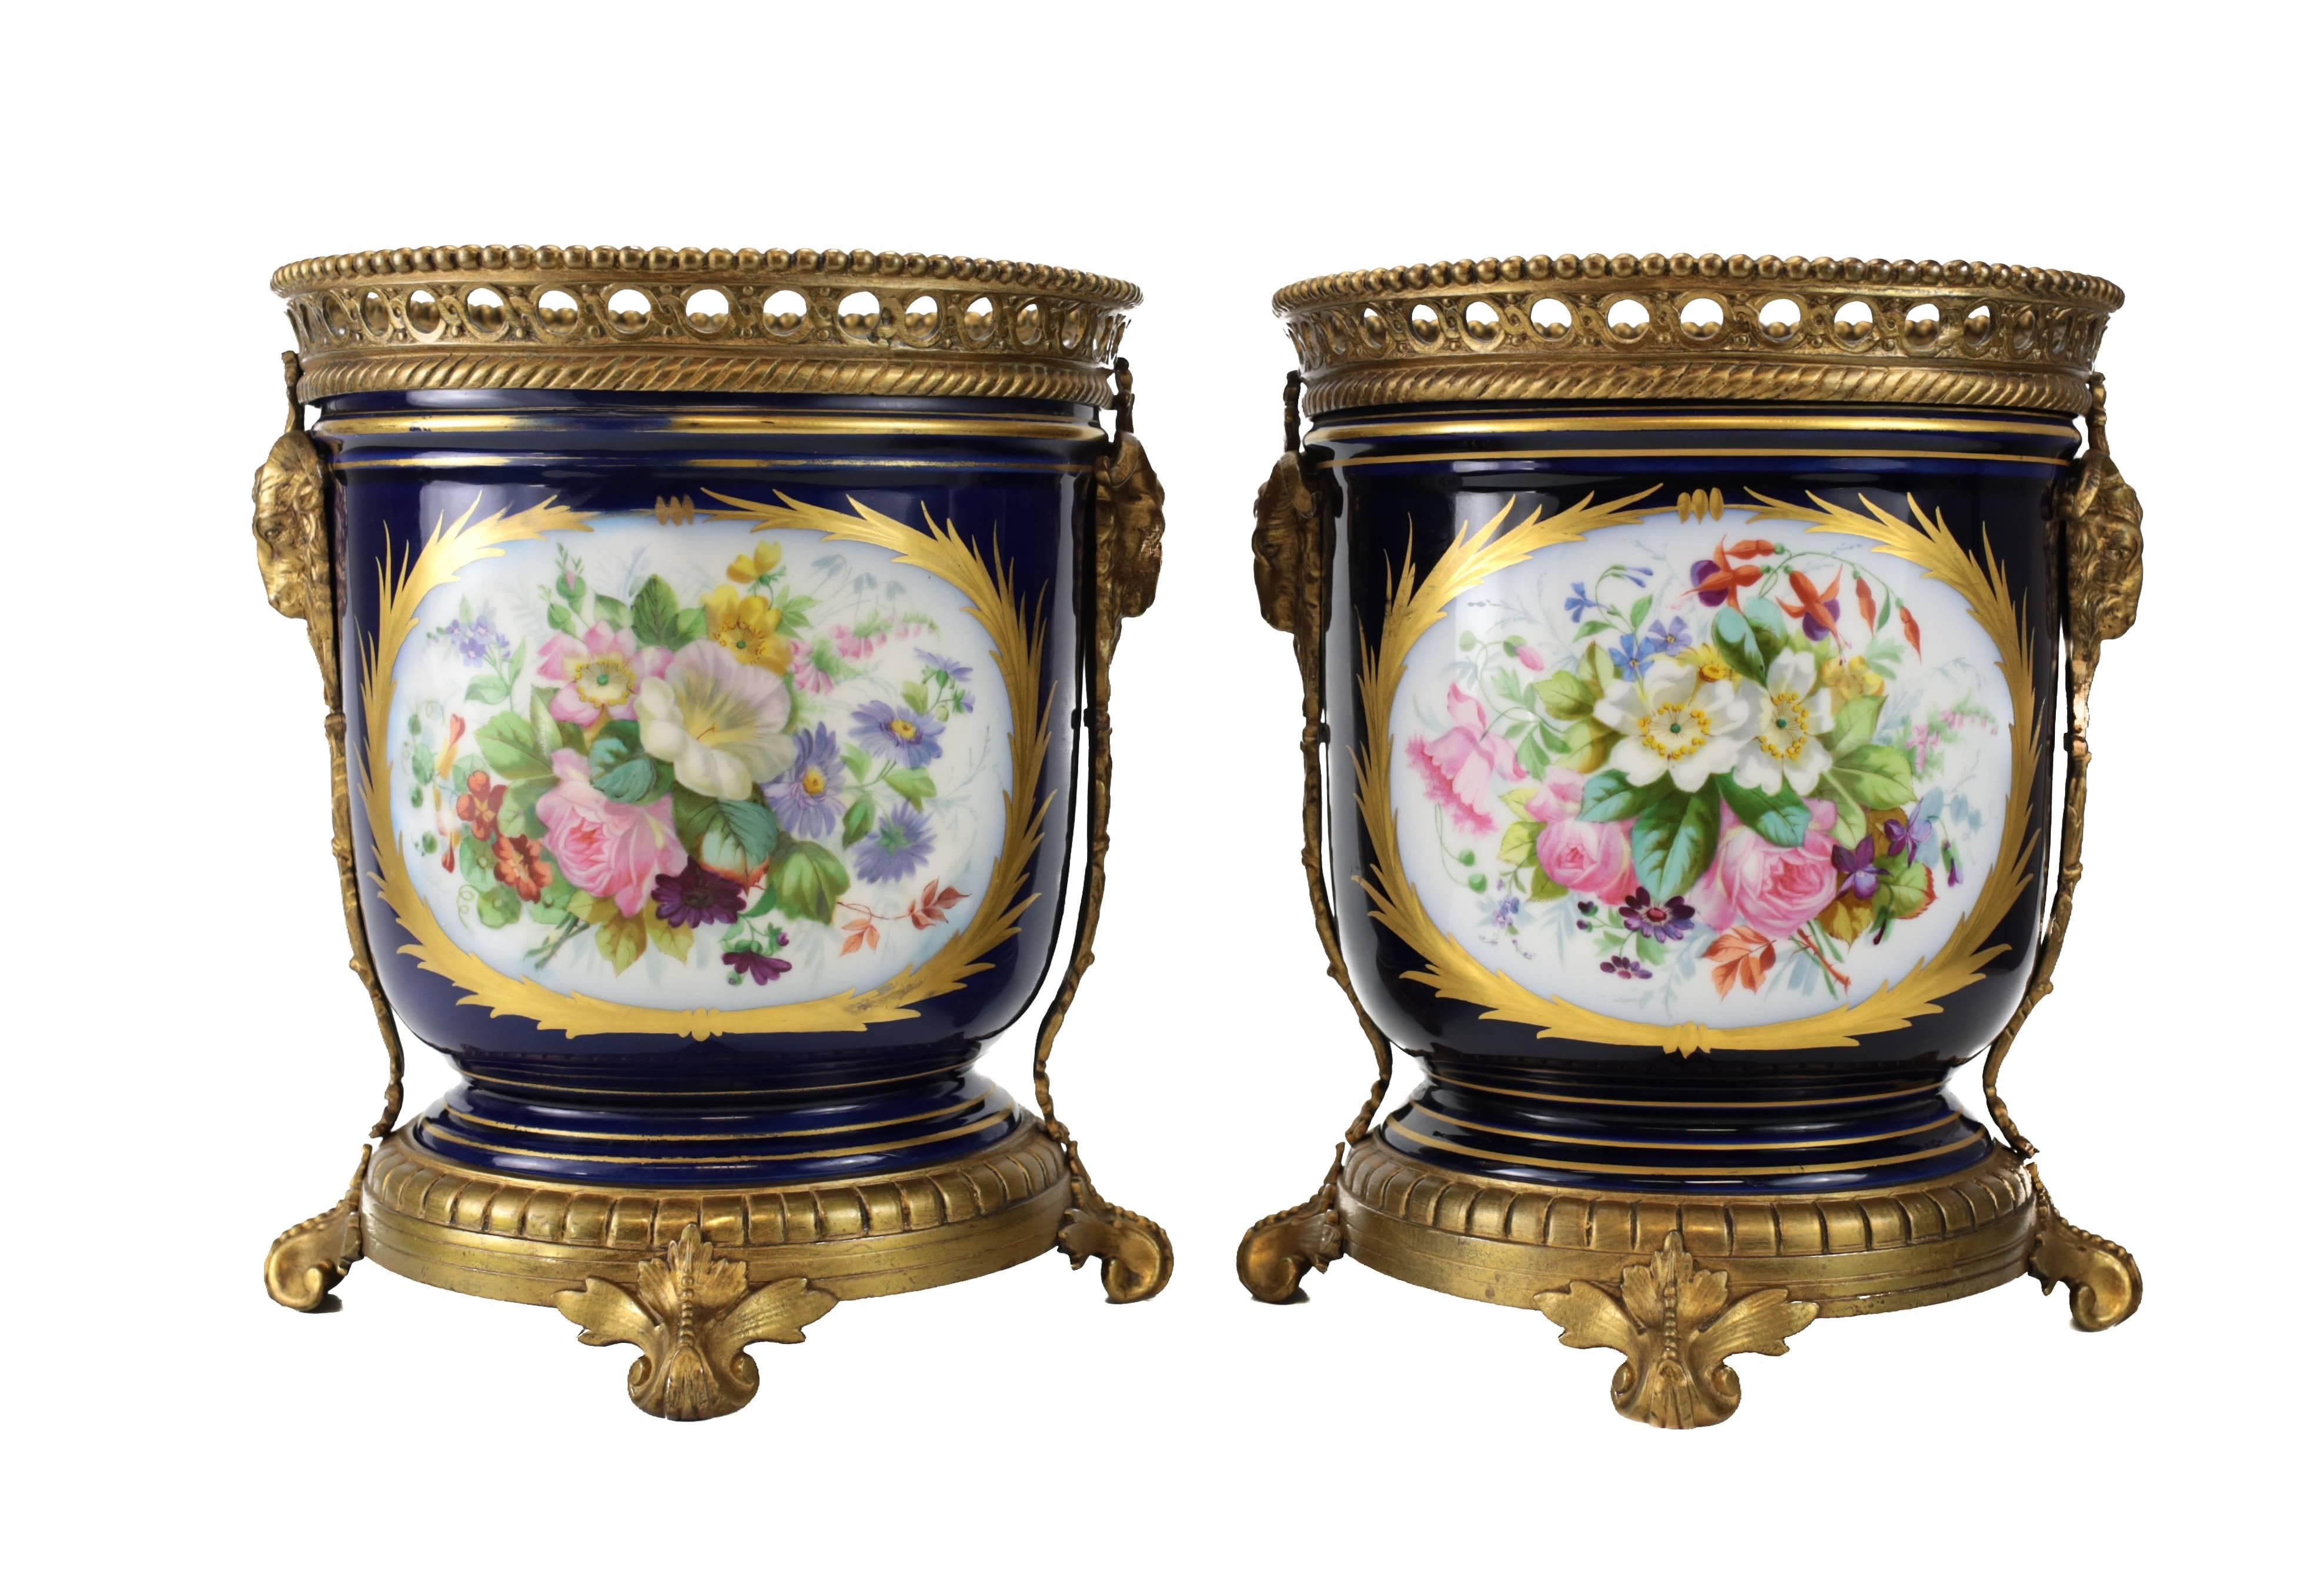 A matching pair of late 19th century French porcelain and gold decorated bronze cache pots. Hand-painted courting scenes to each, with an elaborate floral bouquet to the reverse. Bronze-mounted base with four acanthus formed feet, reticulated rim